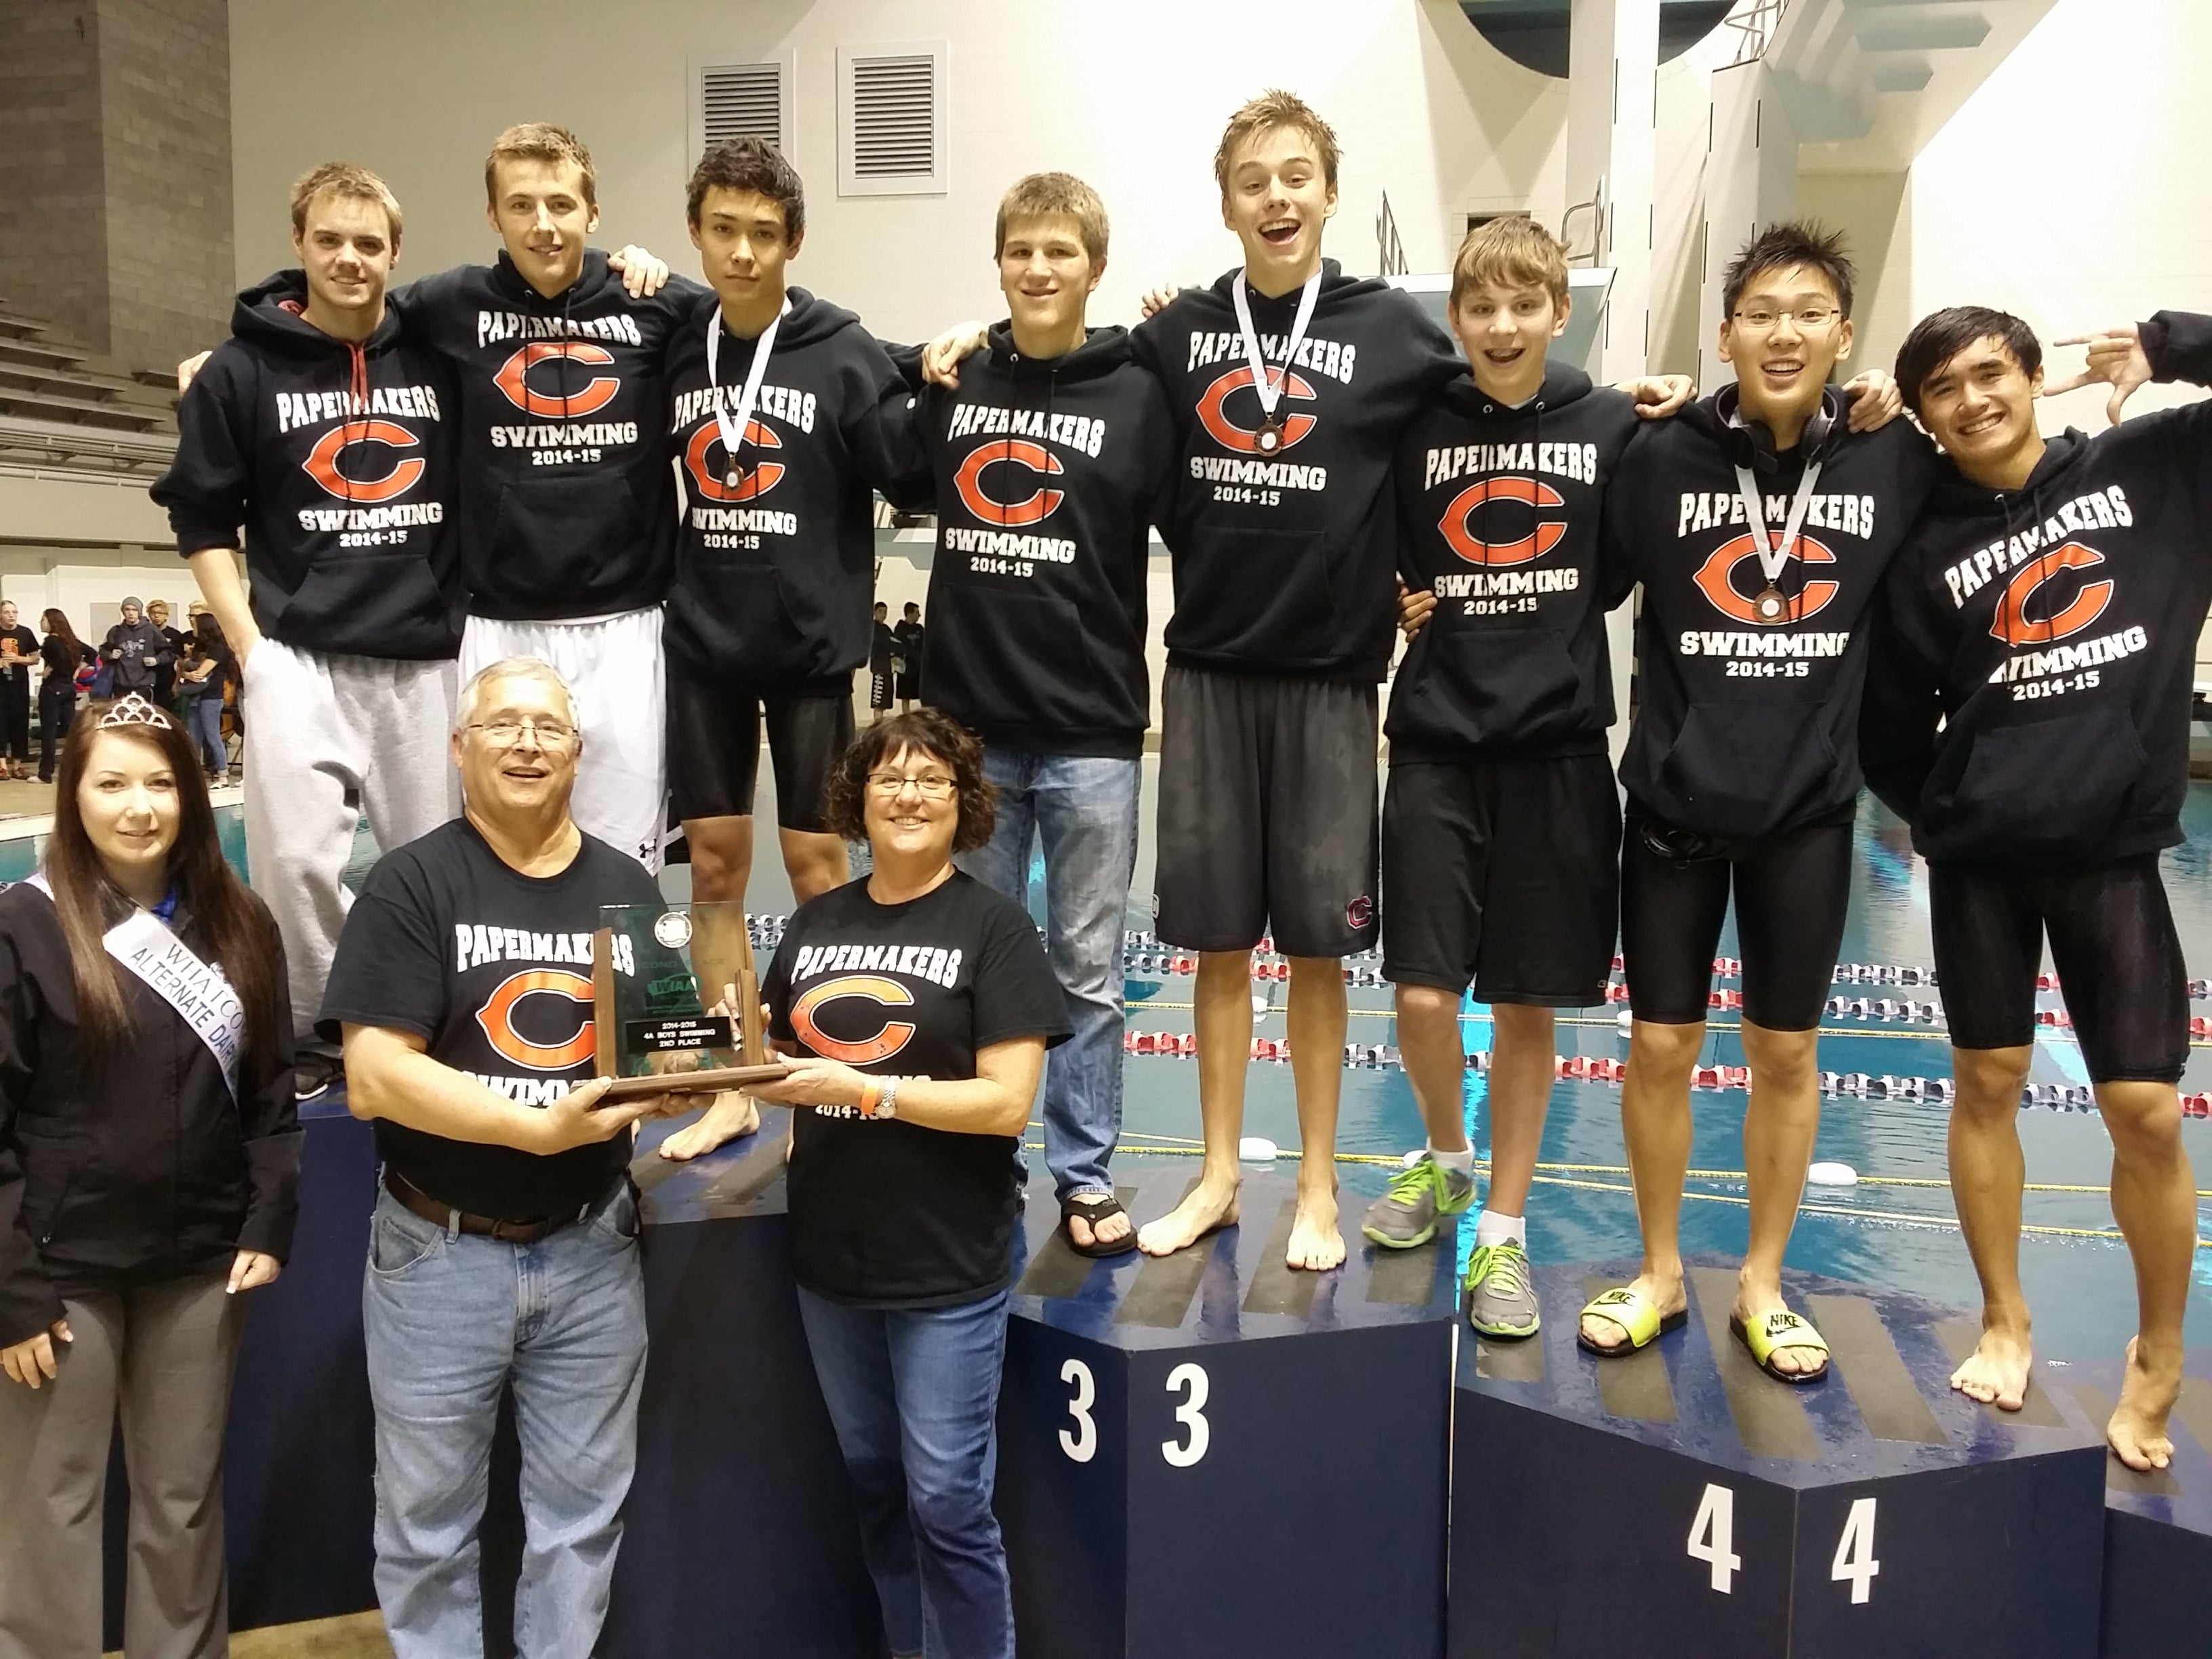 The Camas High School boys swimming team clinched second place at the state championship meet Saturday. Pictured on the podium (left to right): Luke Albert, Lucas Ulmer, Tom Utas, Jeff Fadlovich, Kasey Calwell, Finn McClone, Mark Kim and John Utas. Coaches Mike Bemis and Leslie Dahlen are holding the trophy.